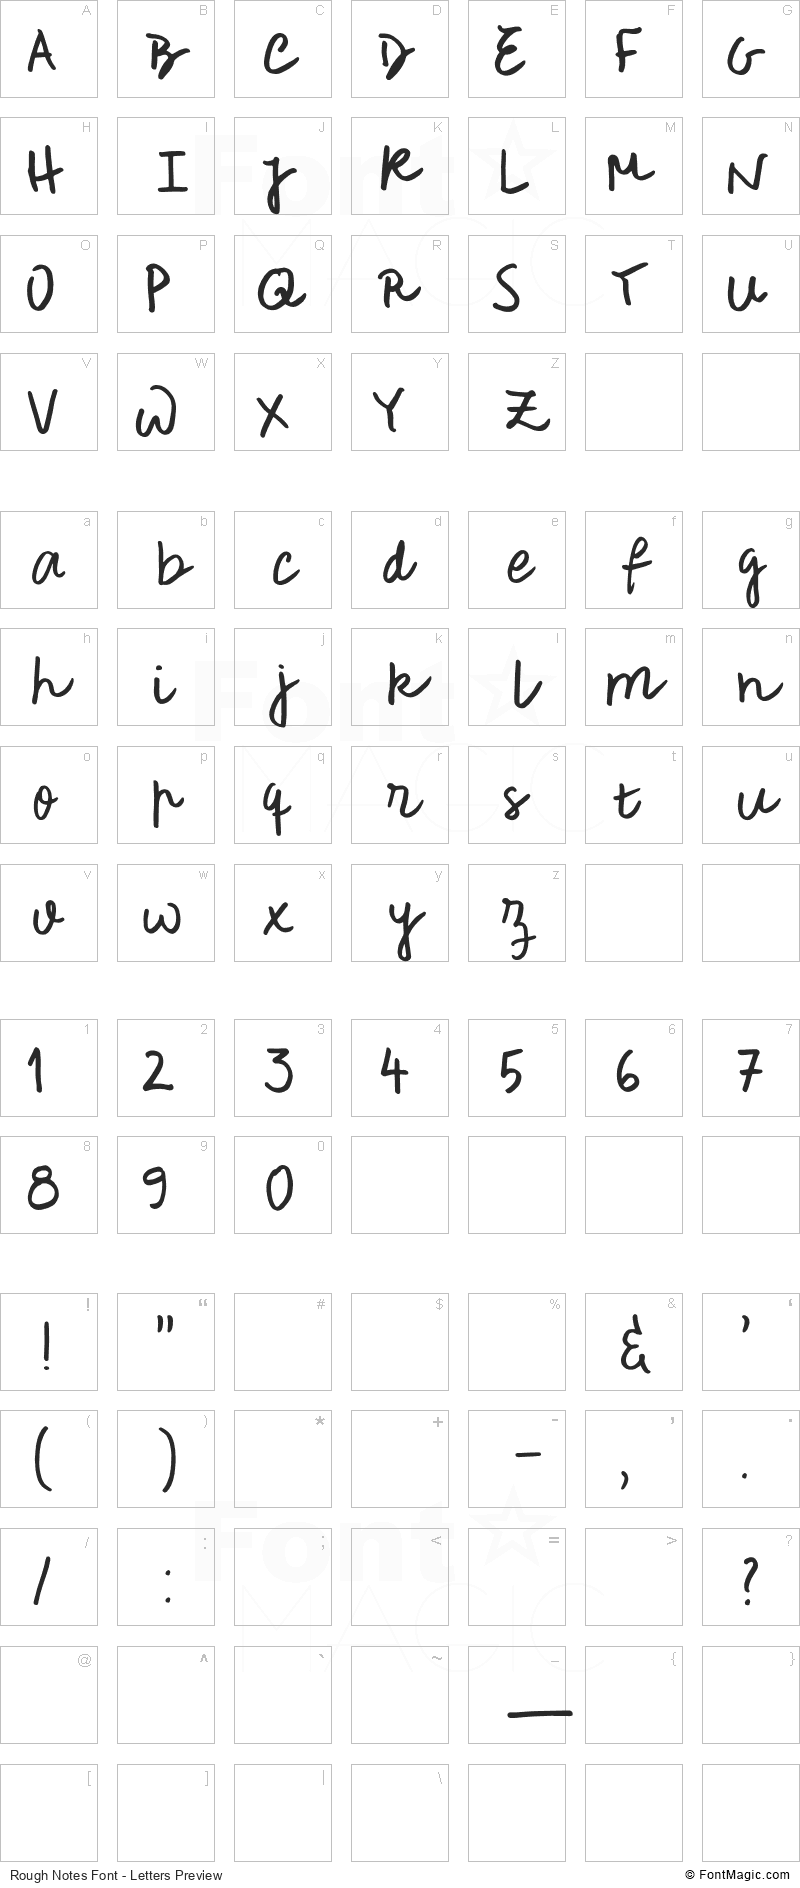 Rough Notes Font - All Latters Preview Chart